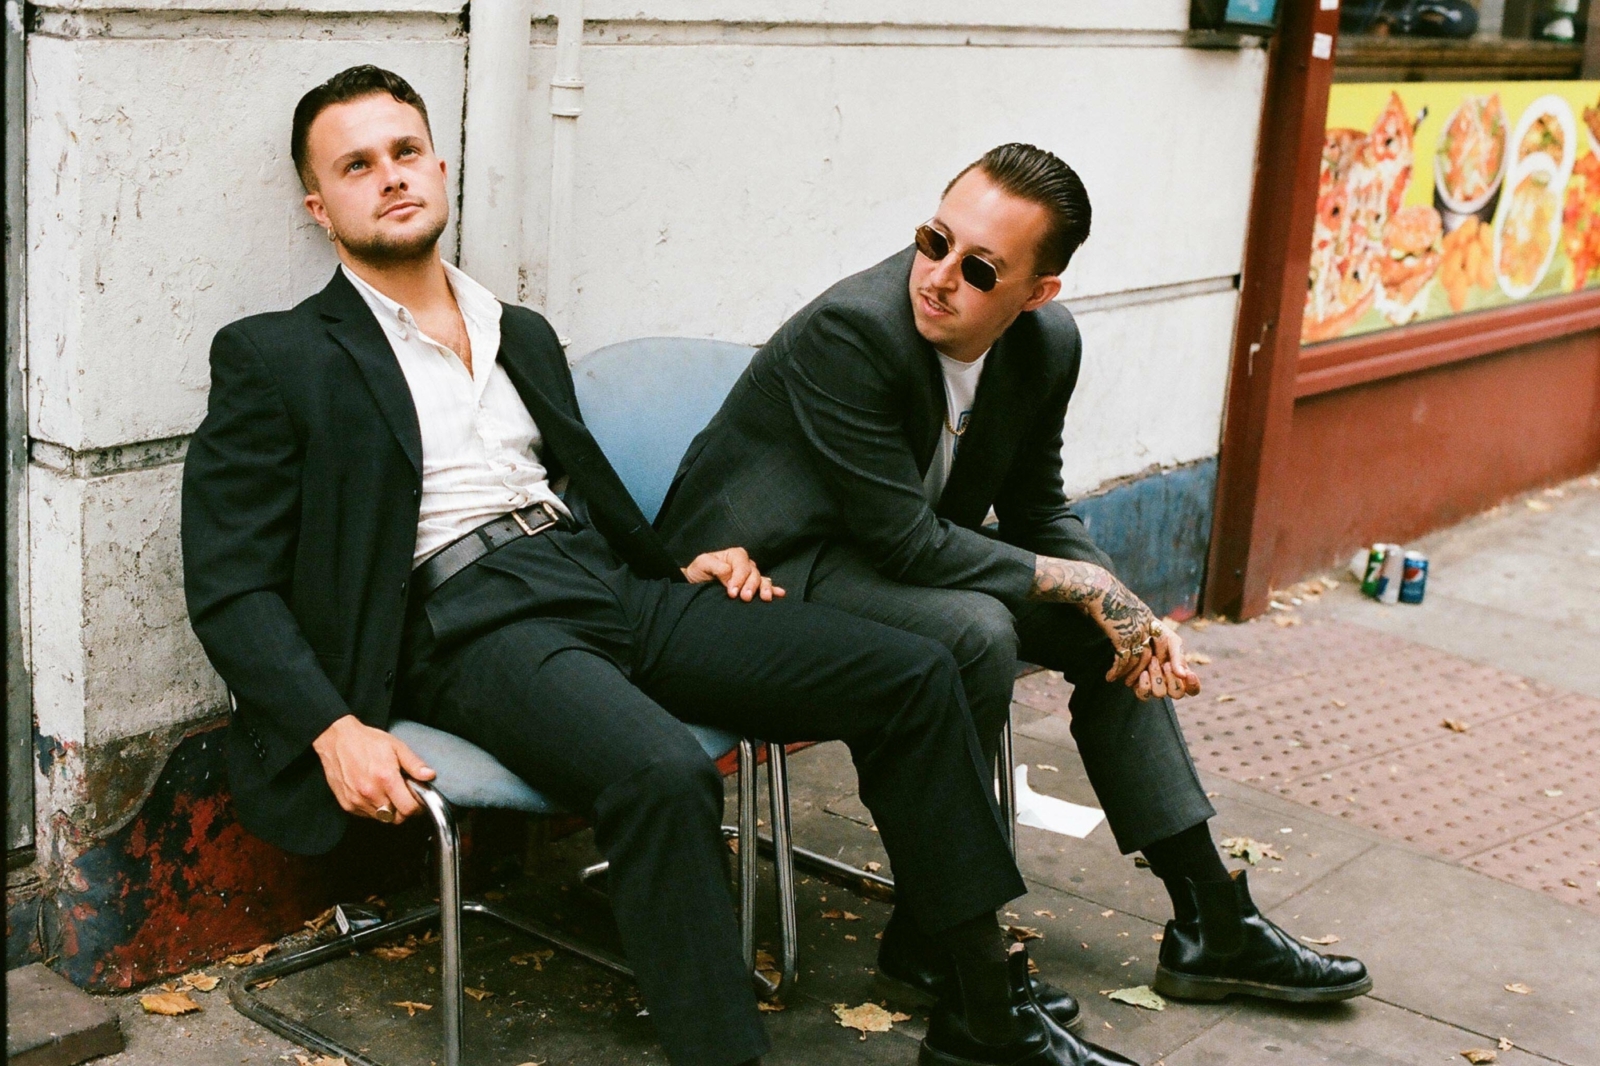 Slaves talk new EP 'The Velvet Ditch', the influence of grime and their continued fight against preconceptions